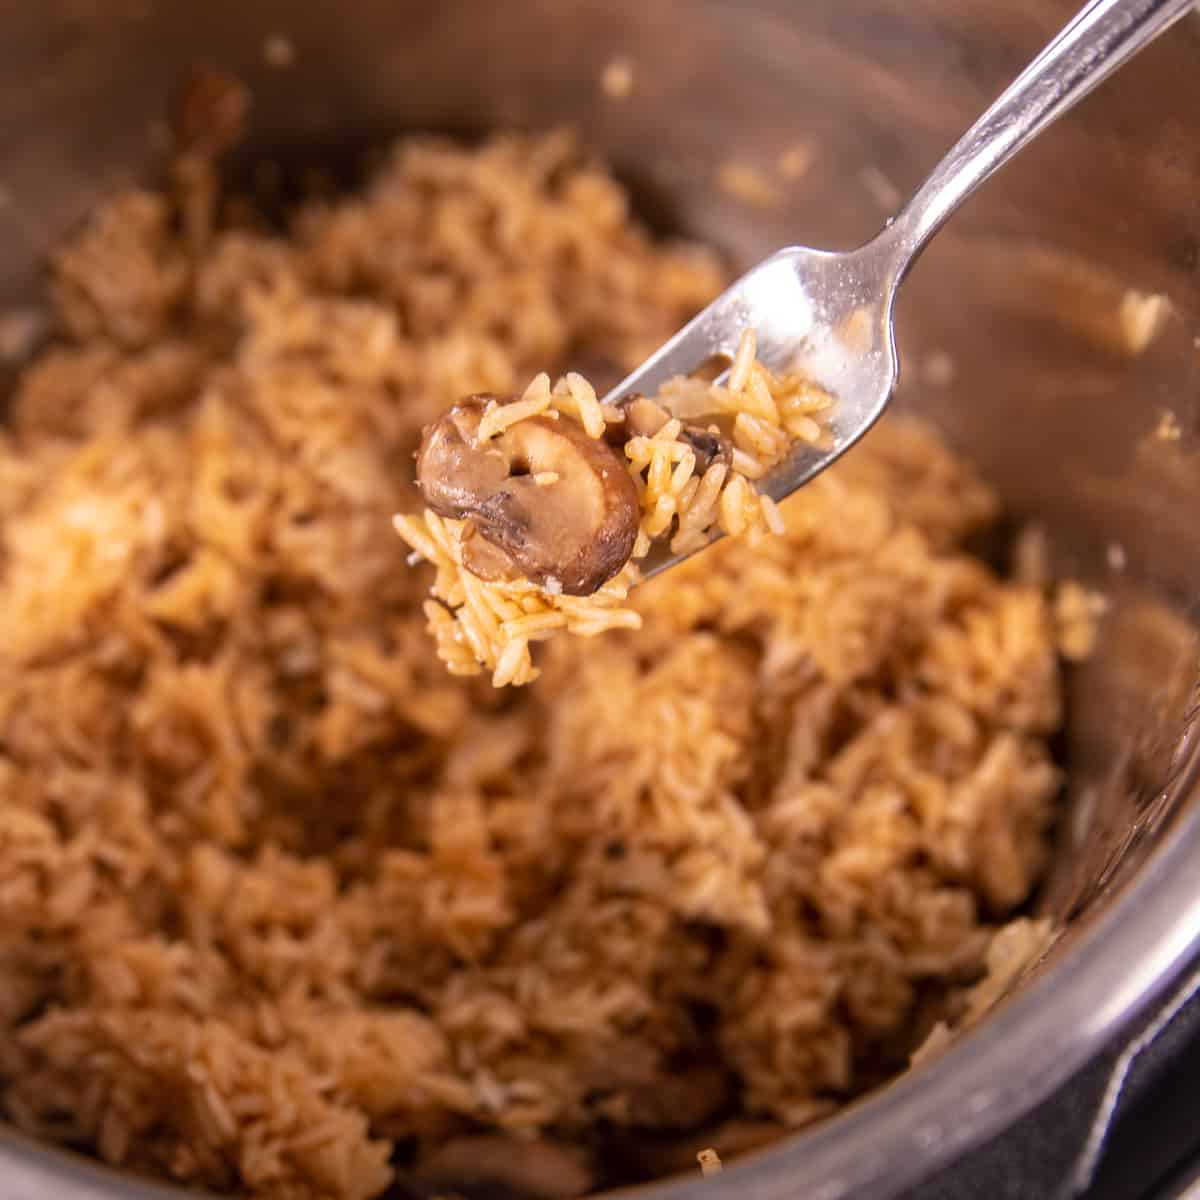 Fork showing rice pilaf being fluffed in inner pot.